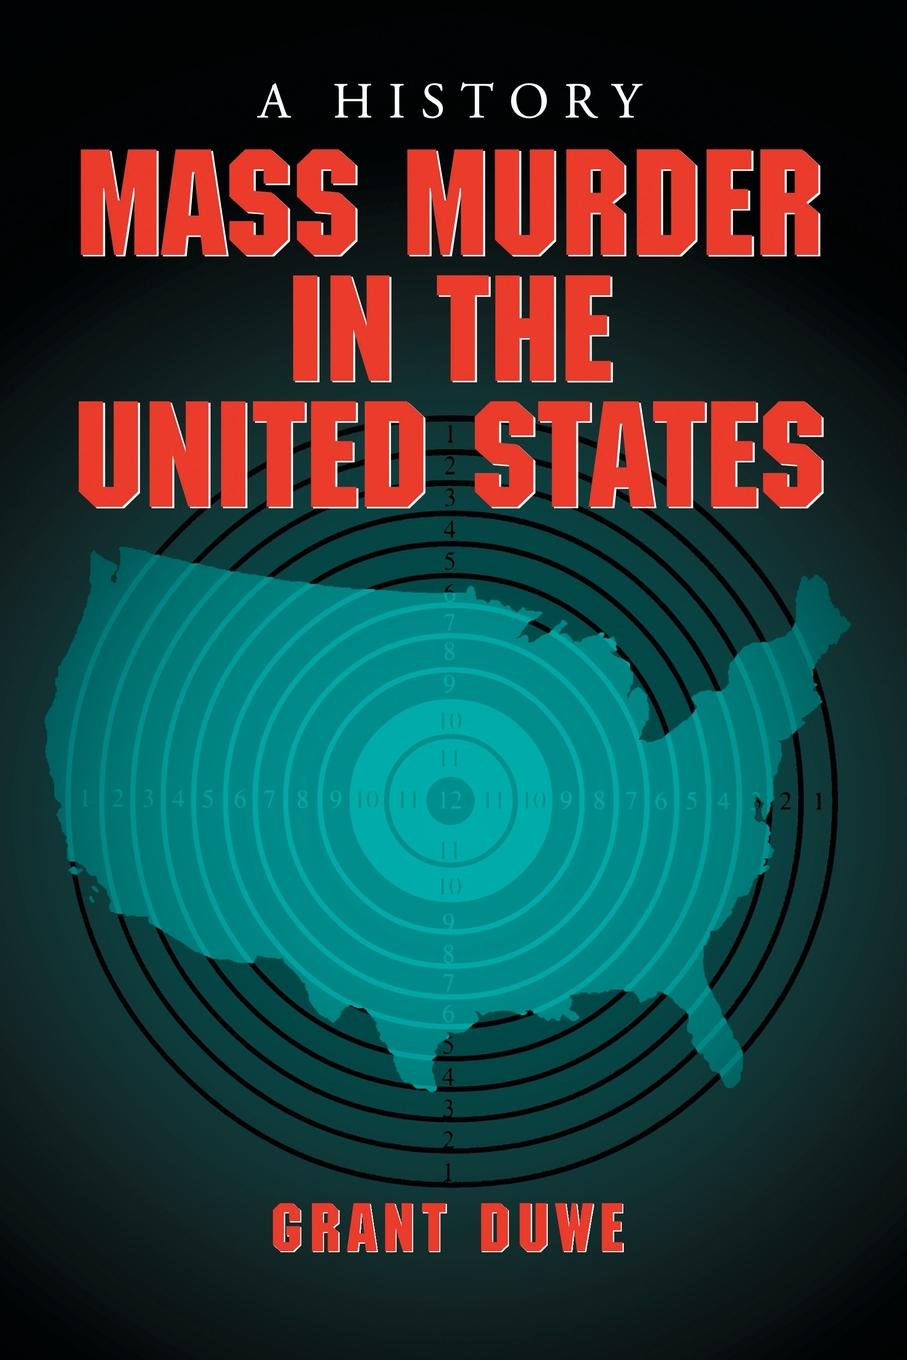 Mass Murder in the United States. A History